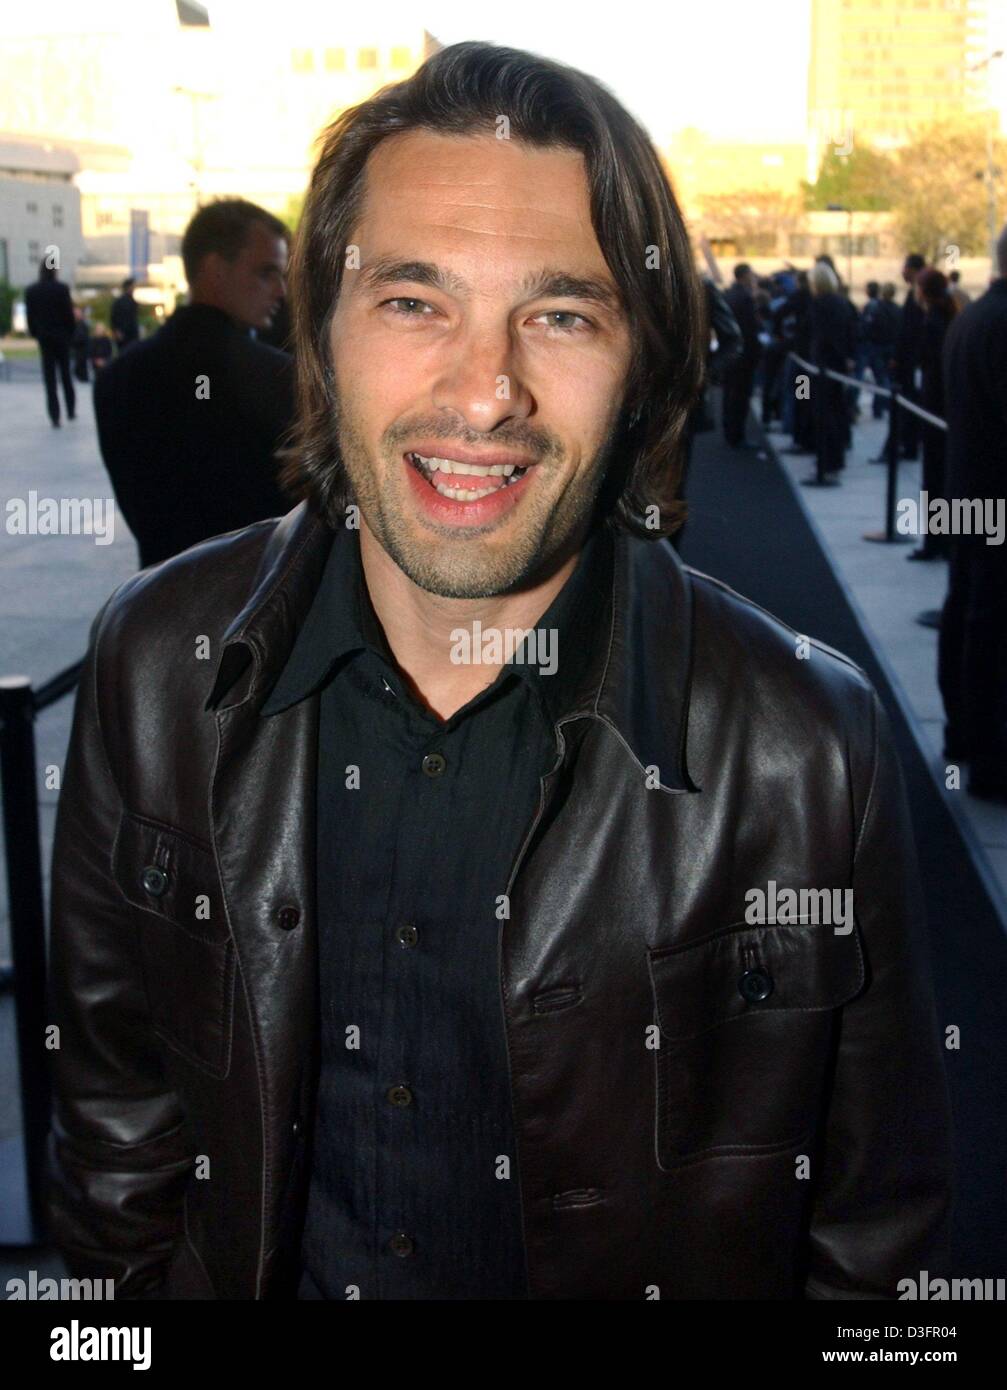 (dpa) - French actor Olivier Martinez arrives at Giorgio Armani's party for the opening of Armani's exhibition in Berlin, 7 May 2003. Martinez is the new face for the Armani spring collection 2003. Stock Photo